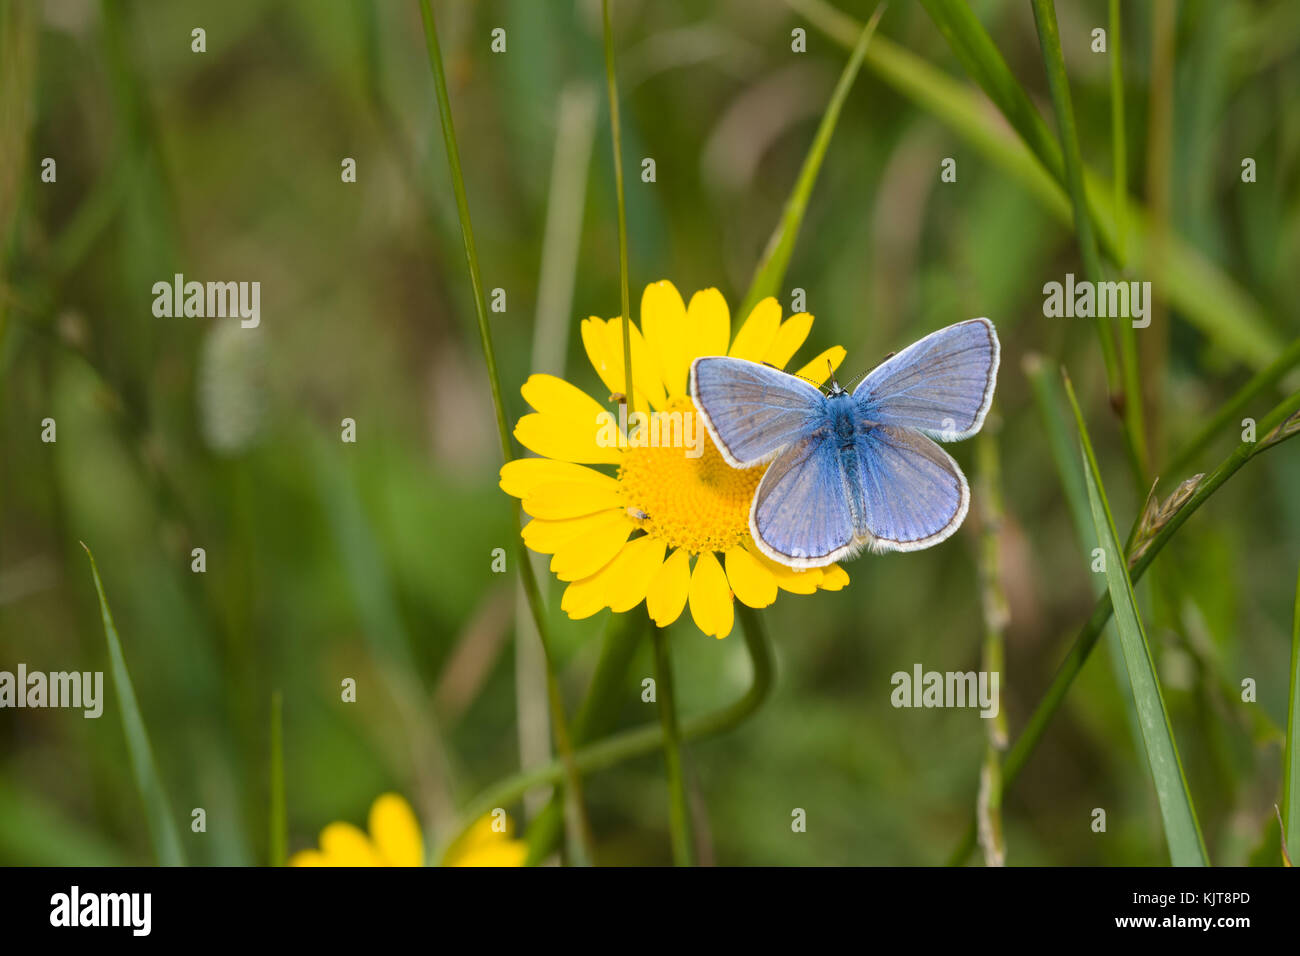 Common blue butterfly resting on golden marguerite Stock Photo